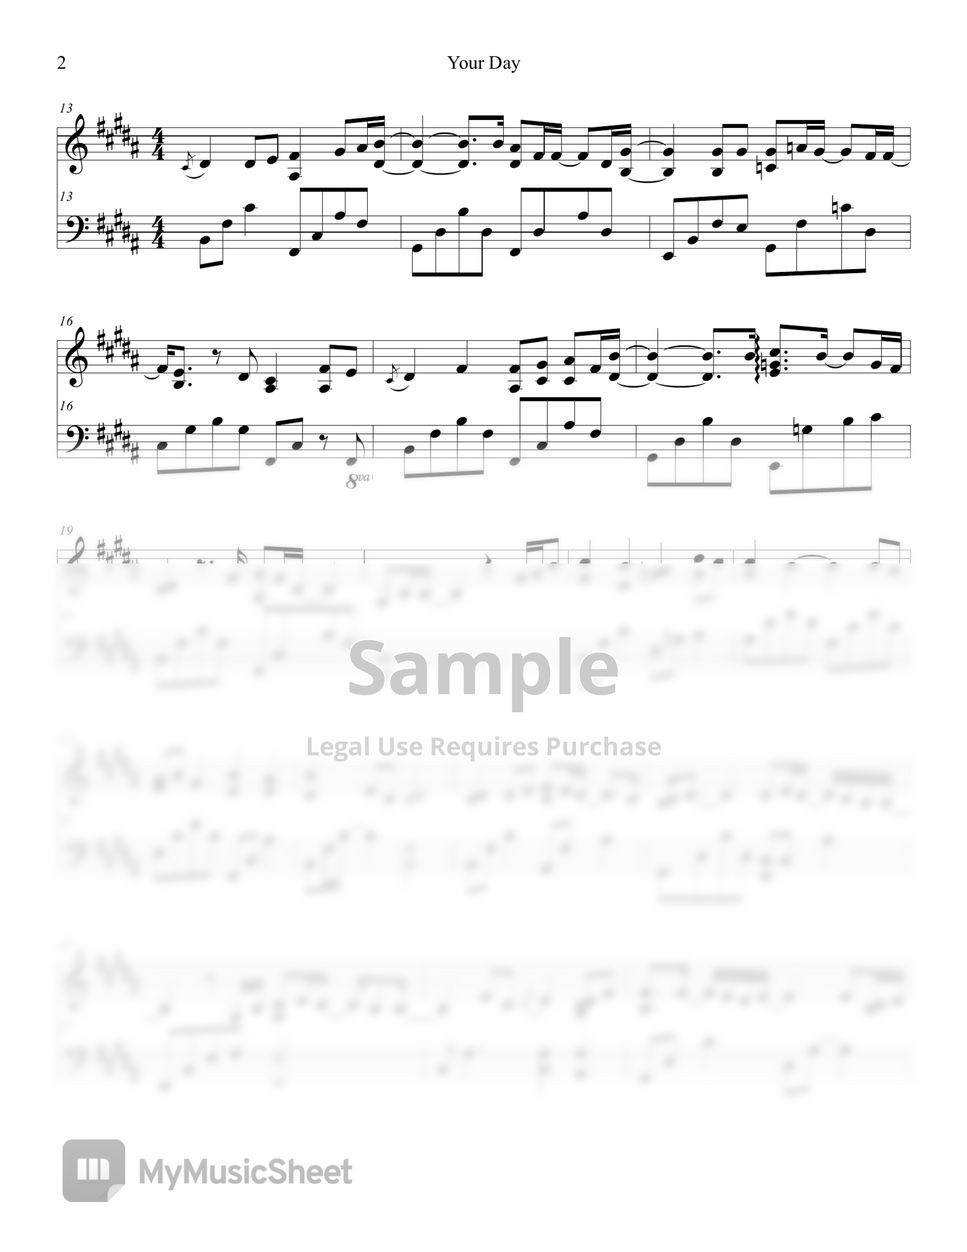 Gummy - Your Day (+ Easy key) Sheets by Lunar Piano